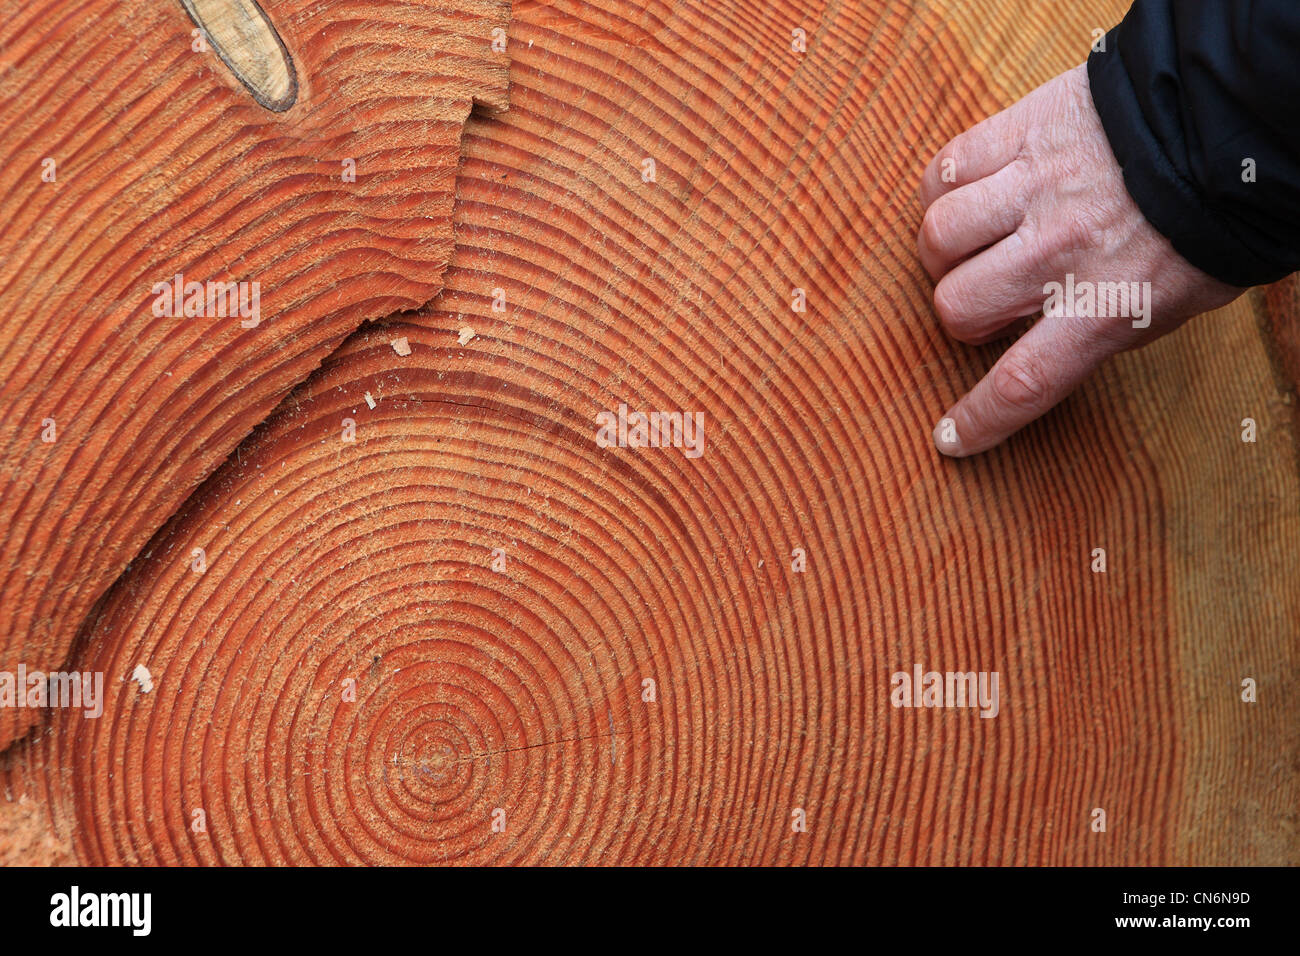 A mans finger counting the tree rings on a recently felled Douglas Fir tee in Scotland Stock Photo